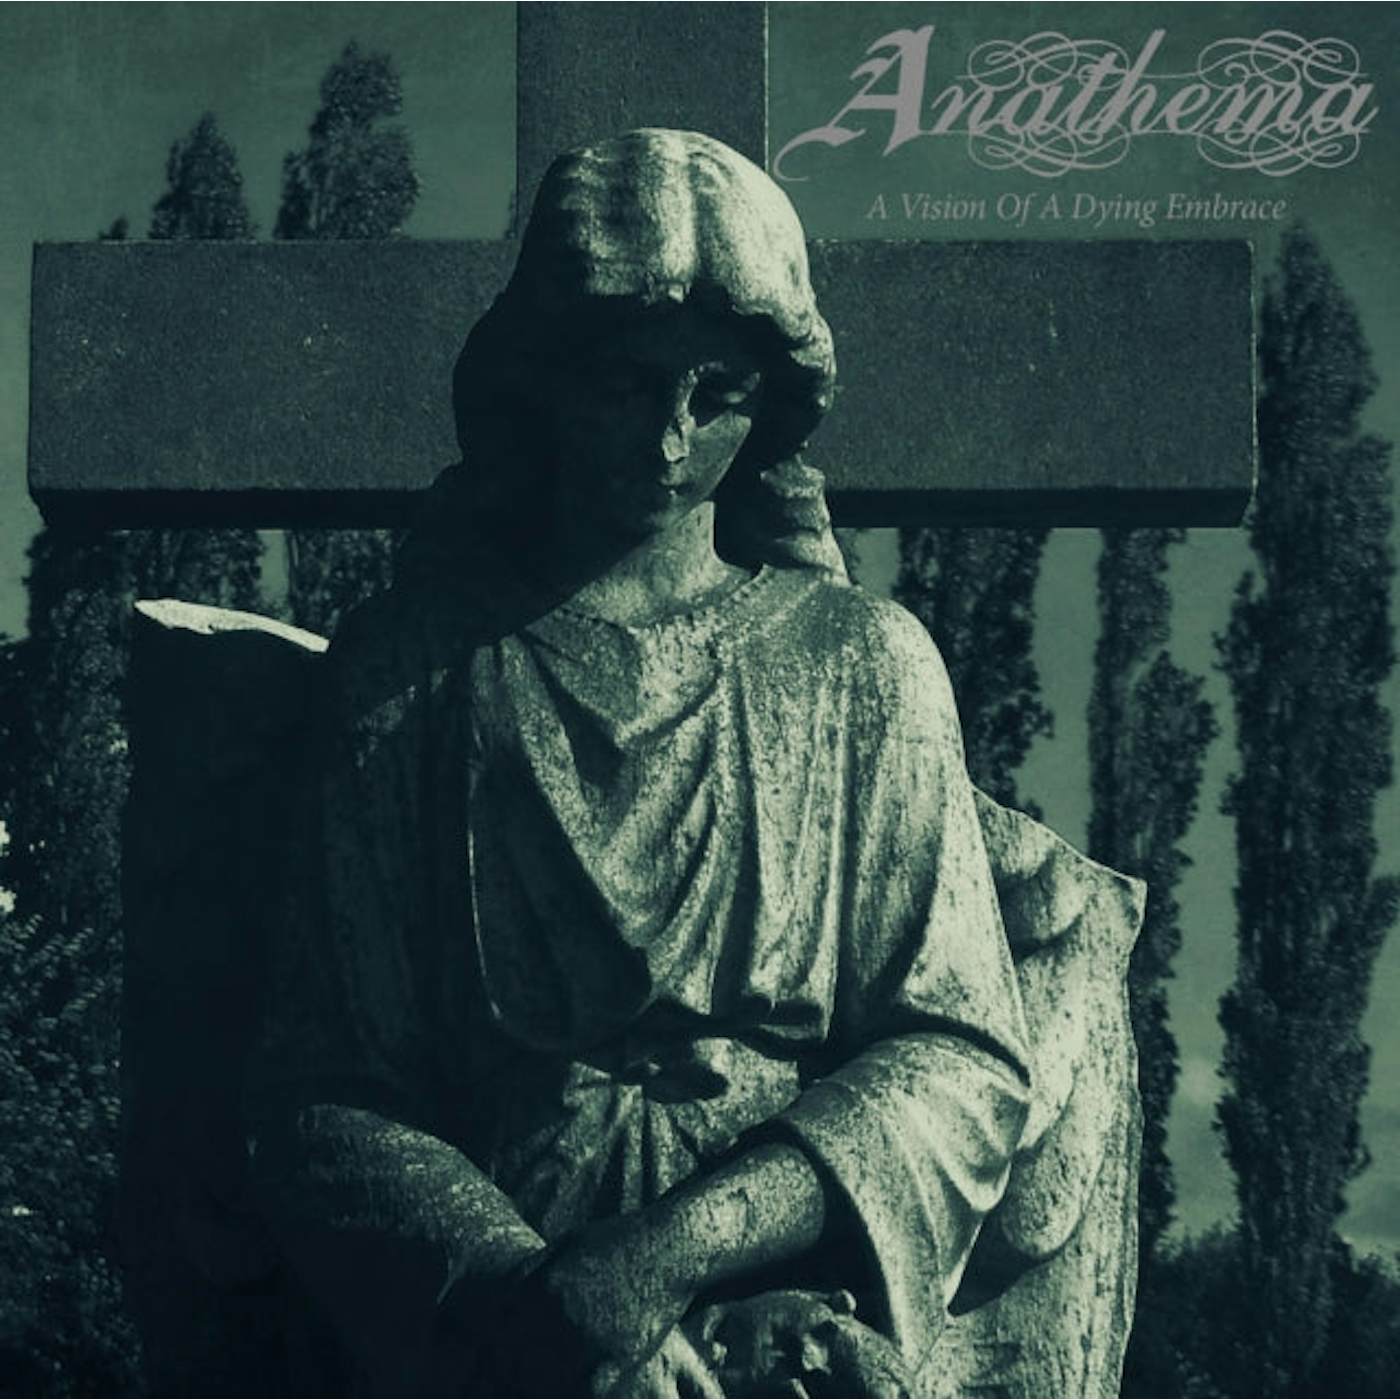 Anathema LP - A Vision Of A Dying Embrace (Vinyl)